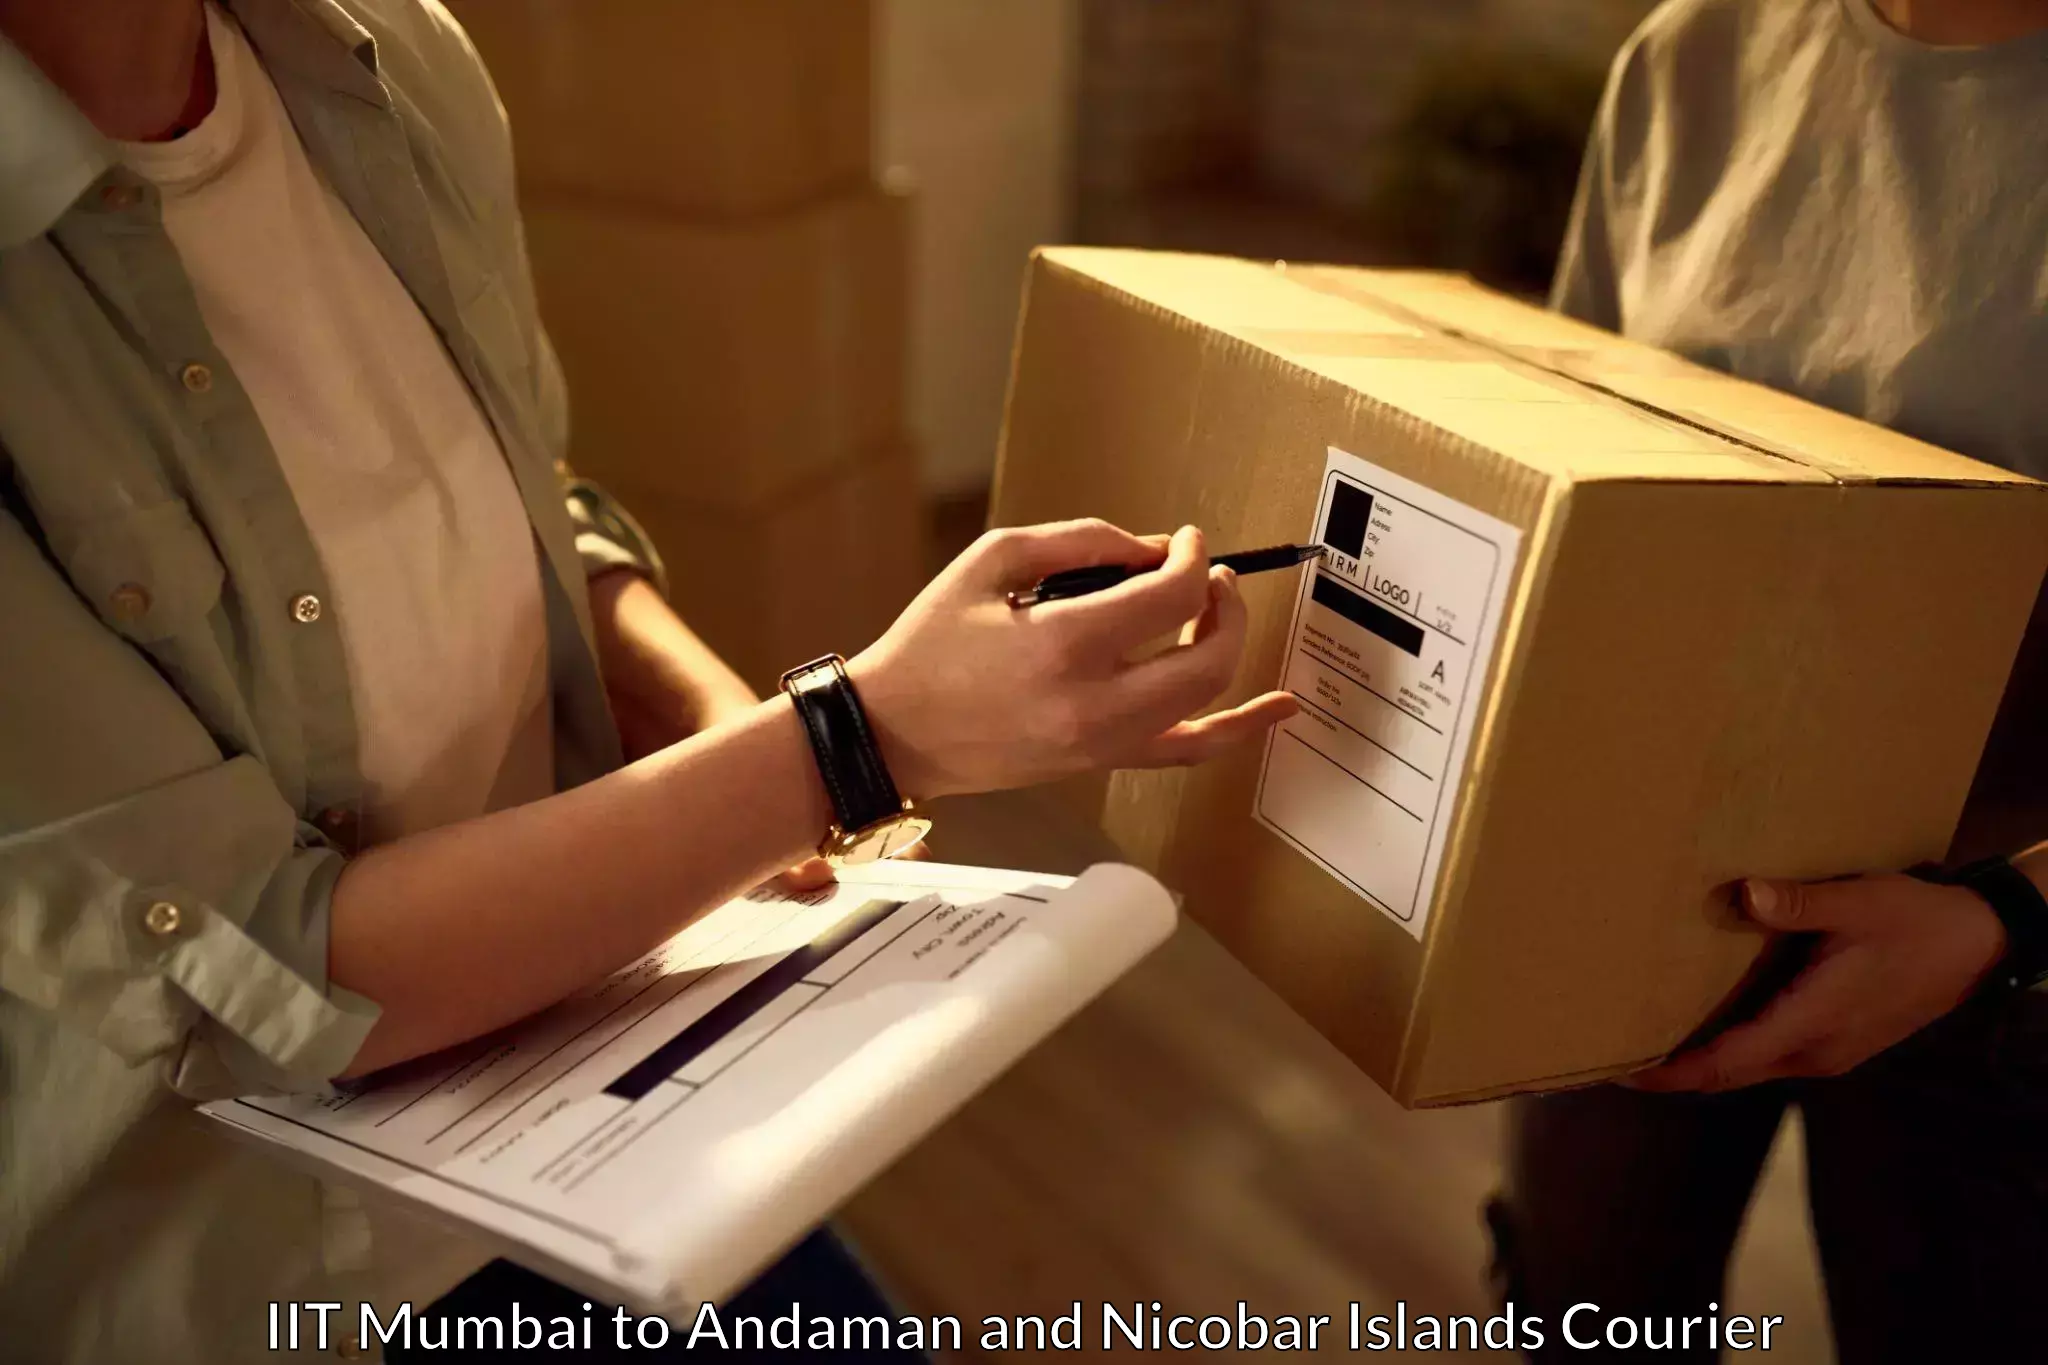 Next-day delivery options IIT Mumbai to Andaman and Nicobar Islands